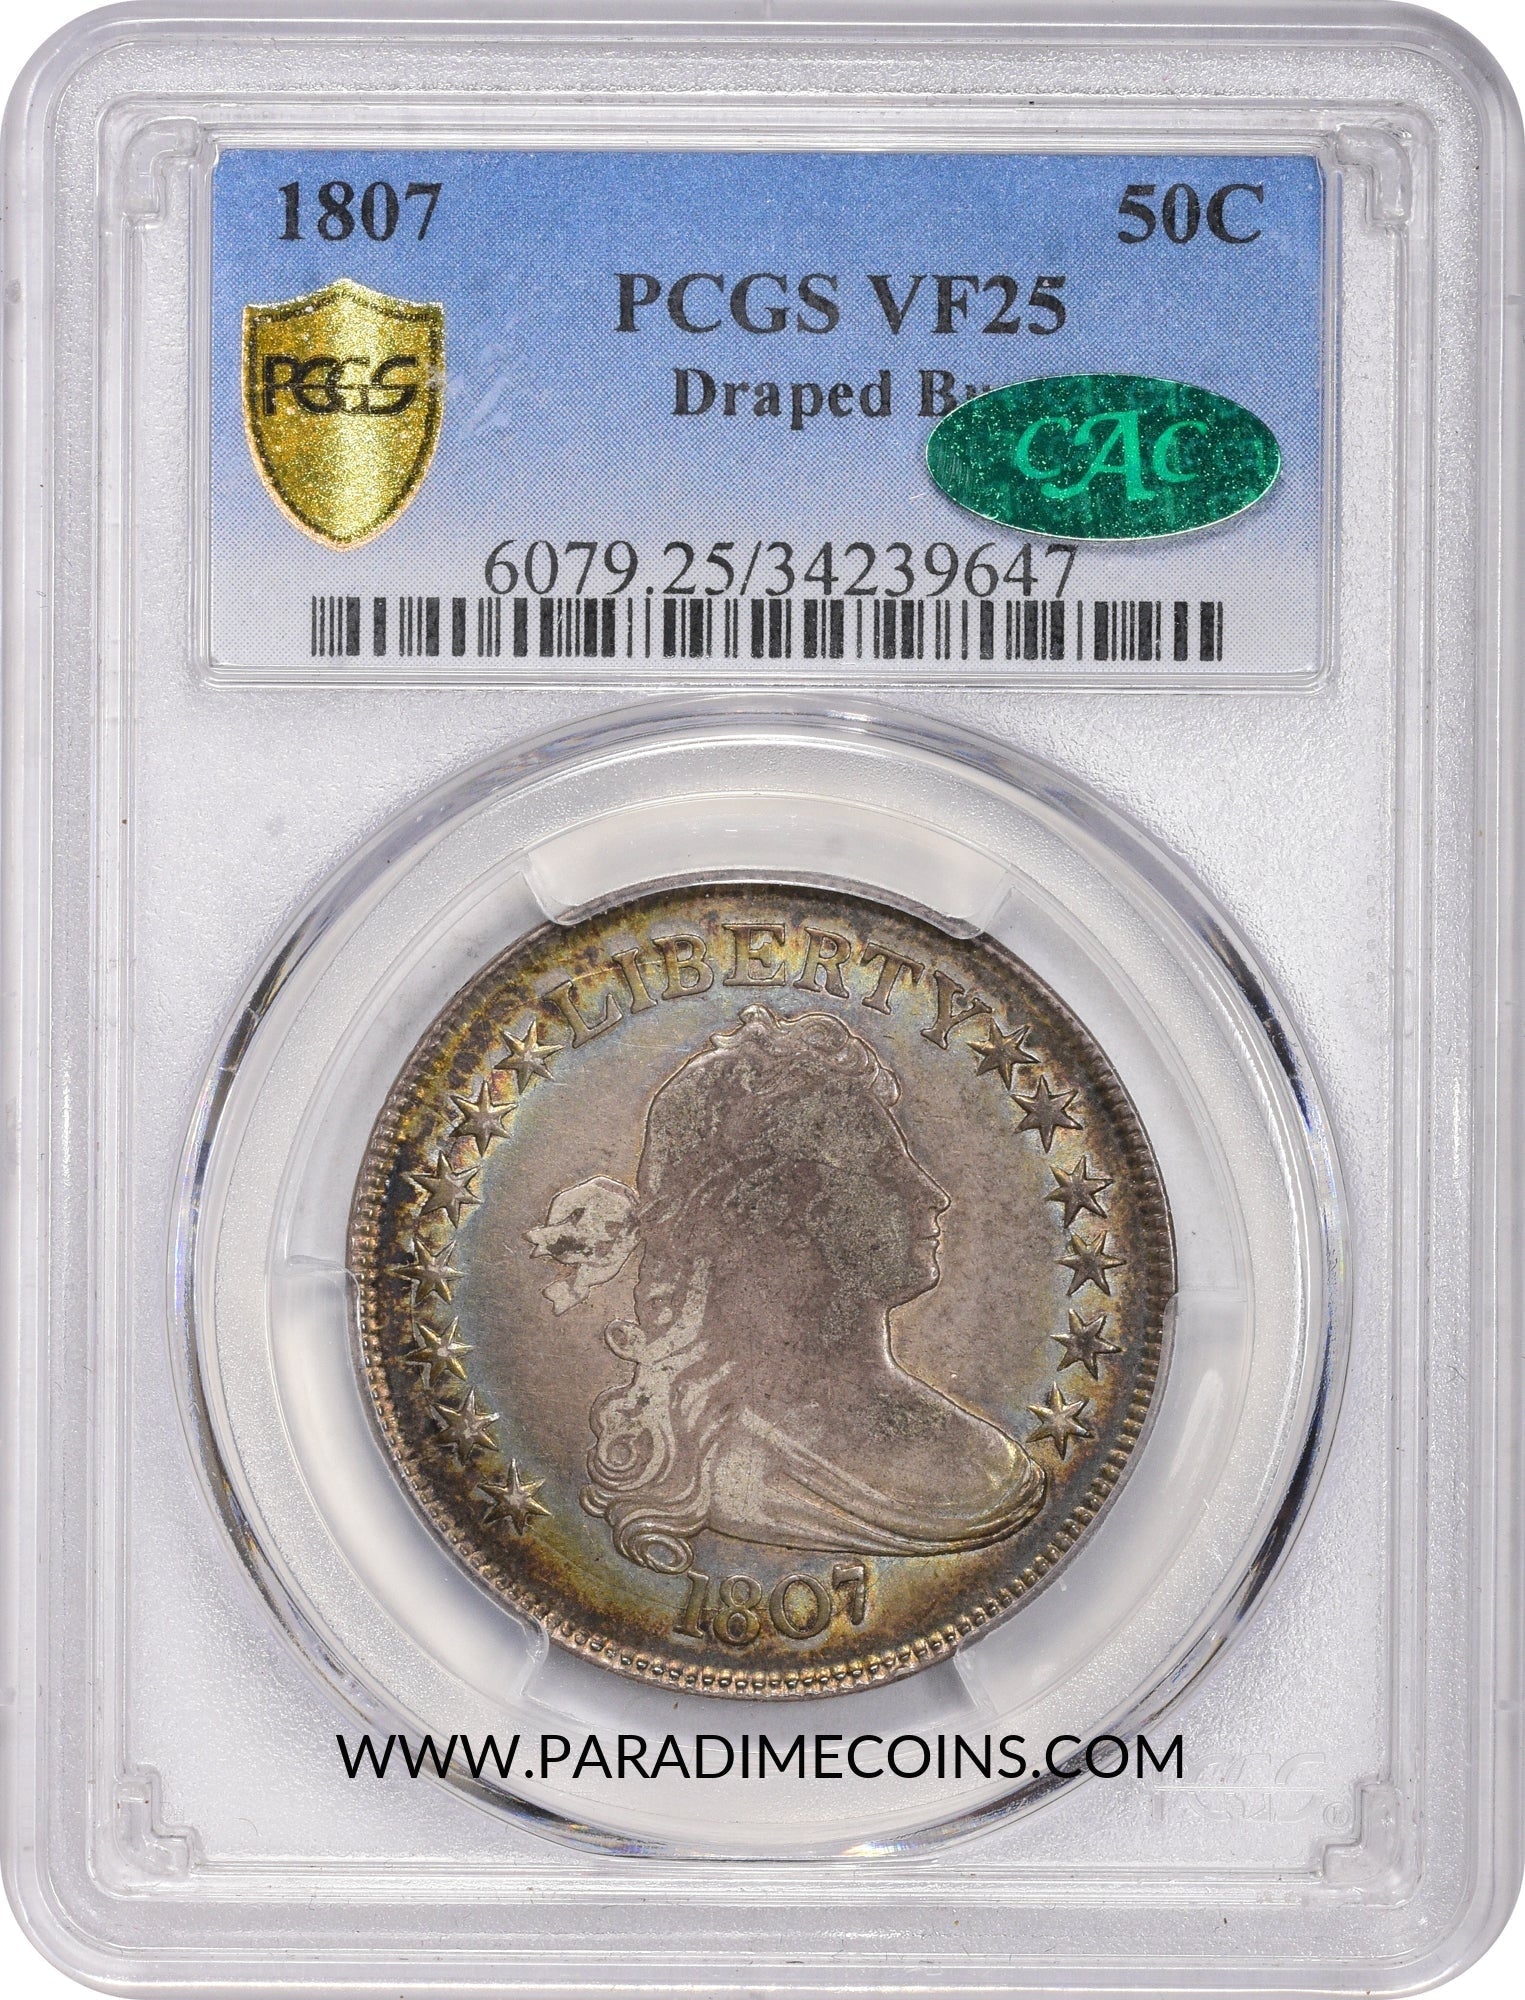 1807 50C DRAPED VF25 PCGS CAC - Paradime Coins US Coins For Sale